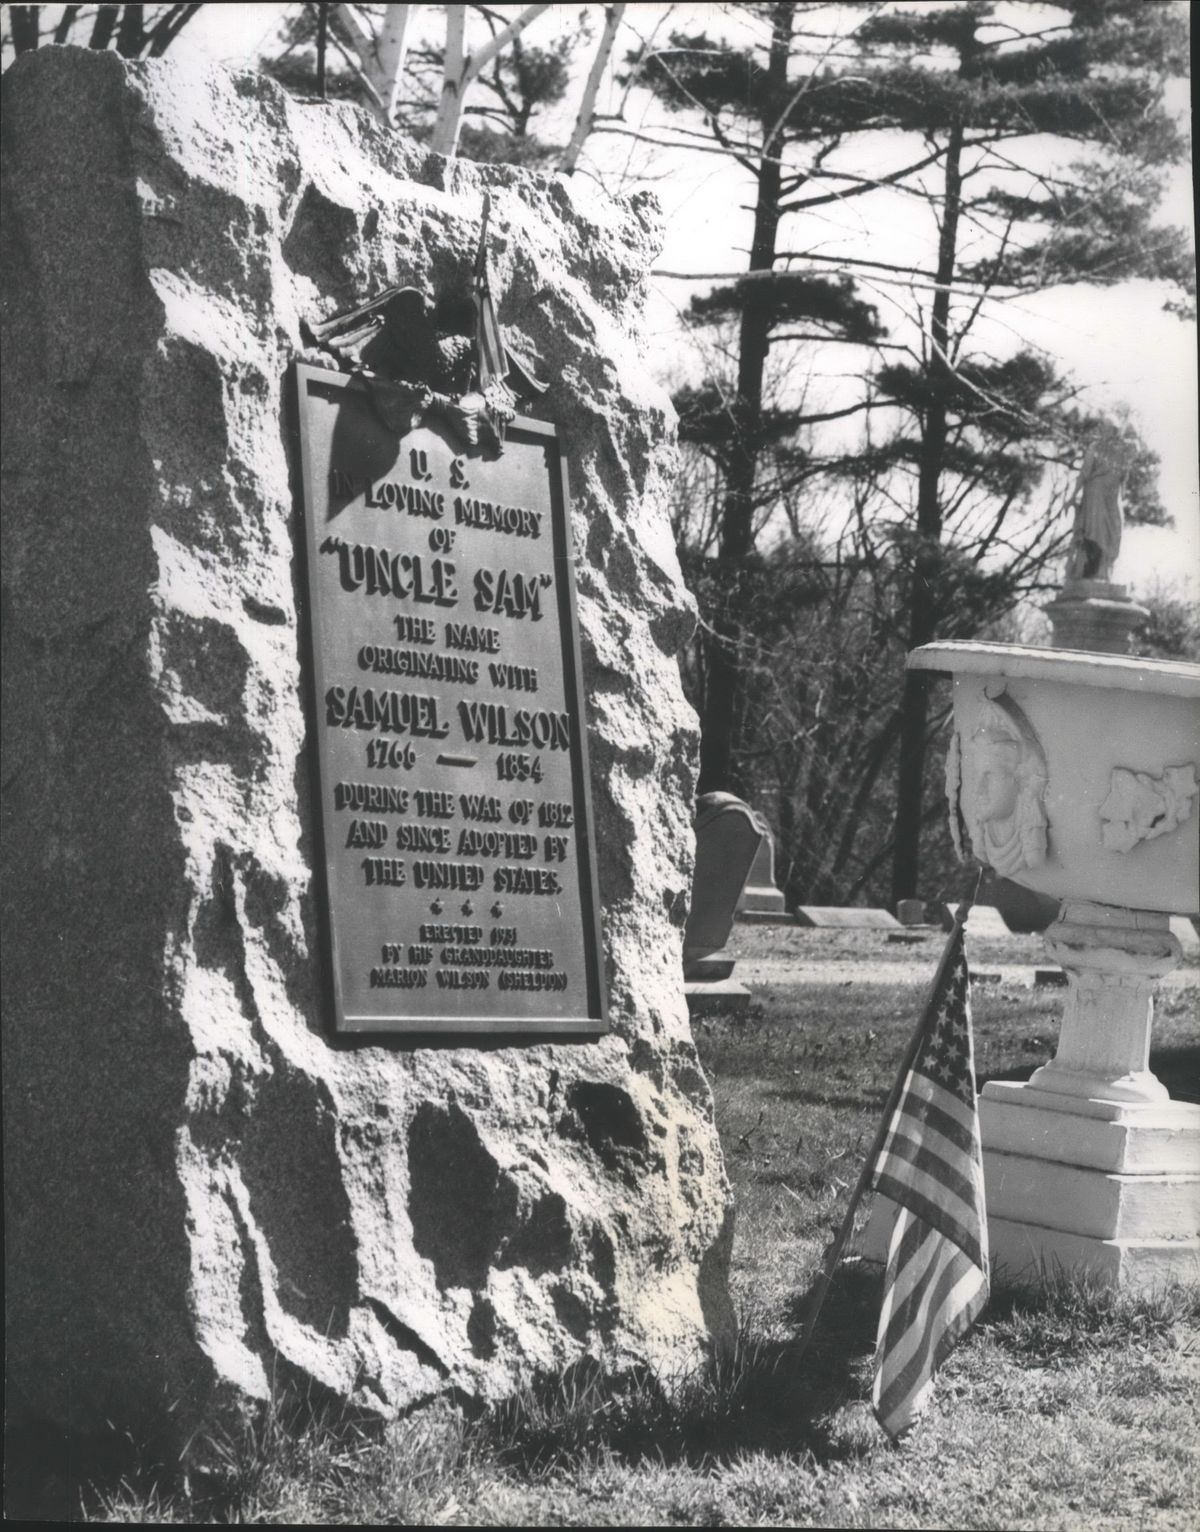 There was not only an Uncle Sam, but he’s buried in Oakwood Cemetery in Troy, New York. A promenade gravestone marks the plot of meat packer Samuel Wilson, who was the source of the U.S. nickname. By stamping “U.S.” on barrel heads of the meat he sold to the Army during the War of 1812, soldiers soon began calling the ration “Uncle Sam’s beef.” Soon the name spread to include just about anything the government issued the soldiers, and hence to the government itself. Uncle Sam Wilson died on July, 31, 1854.  The grave is well cared for and frequently the scene of patriotic ceremonies. (FILE / The Spokesman-Review Archive)